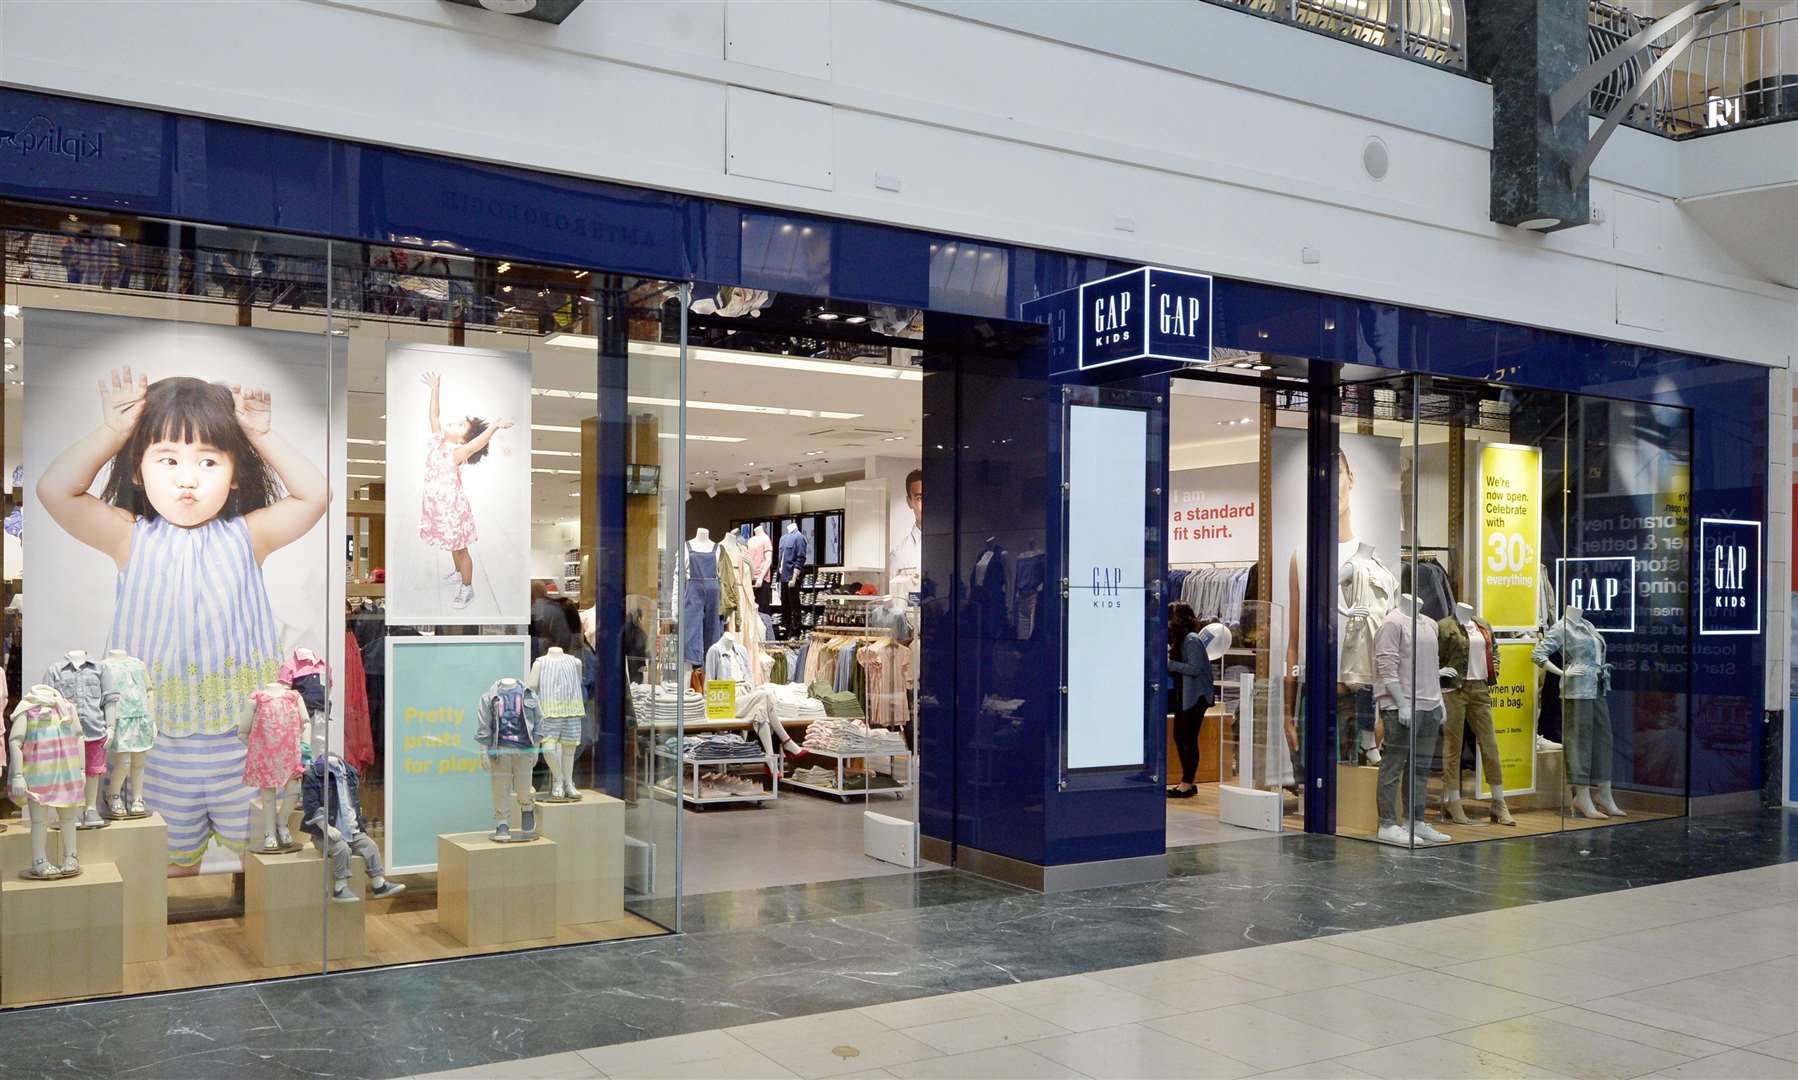 The future of Gap's store in Bluewater is at risk